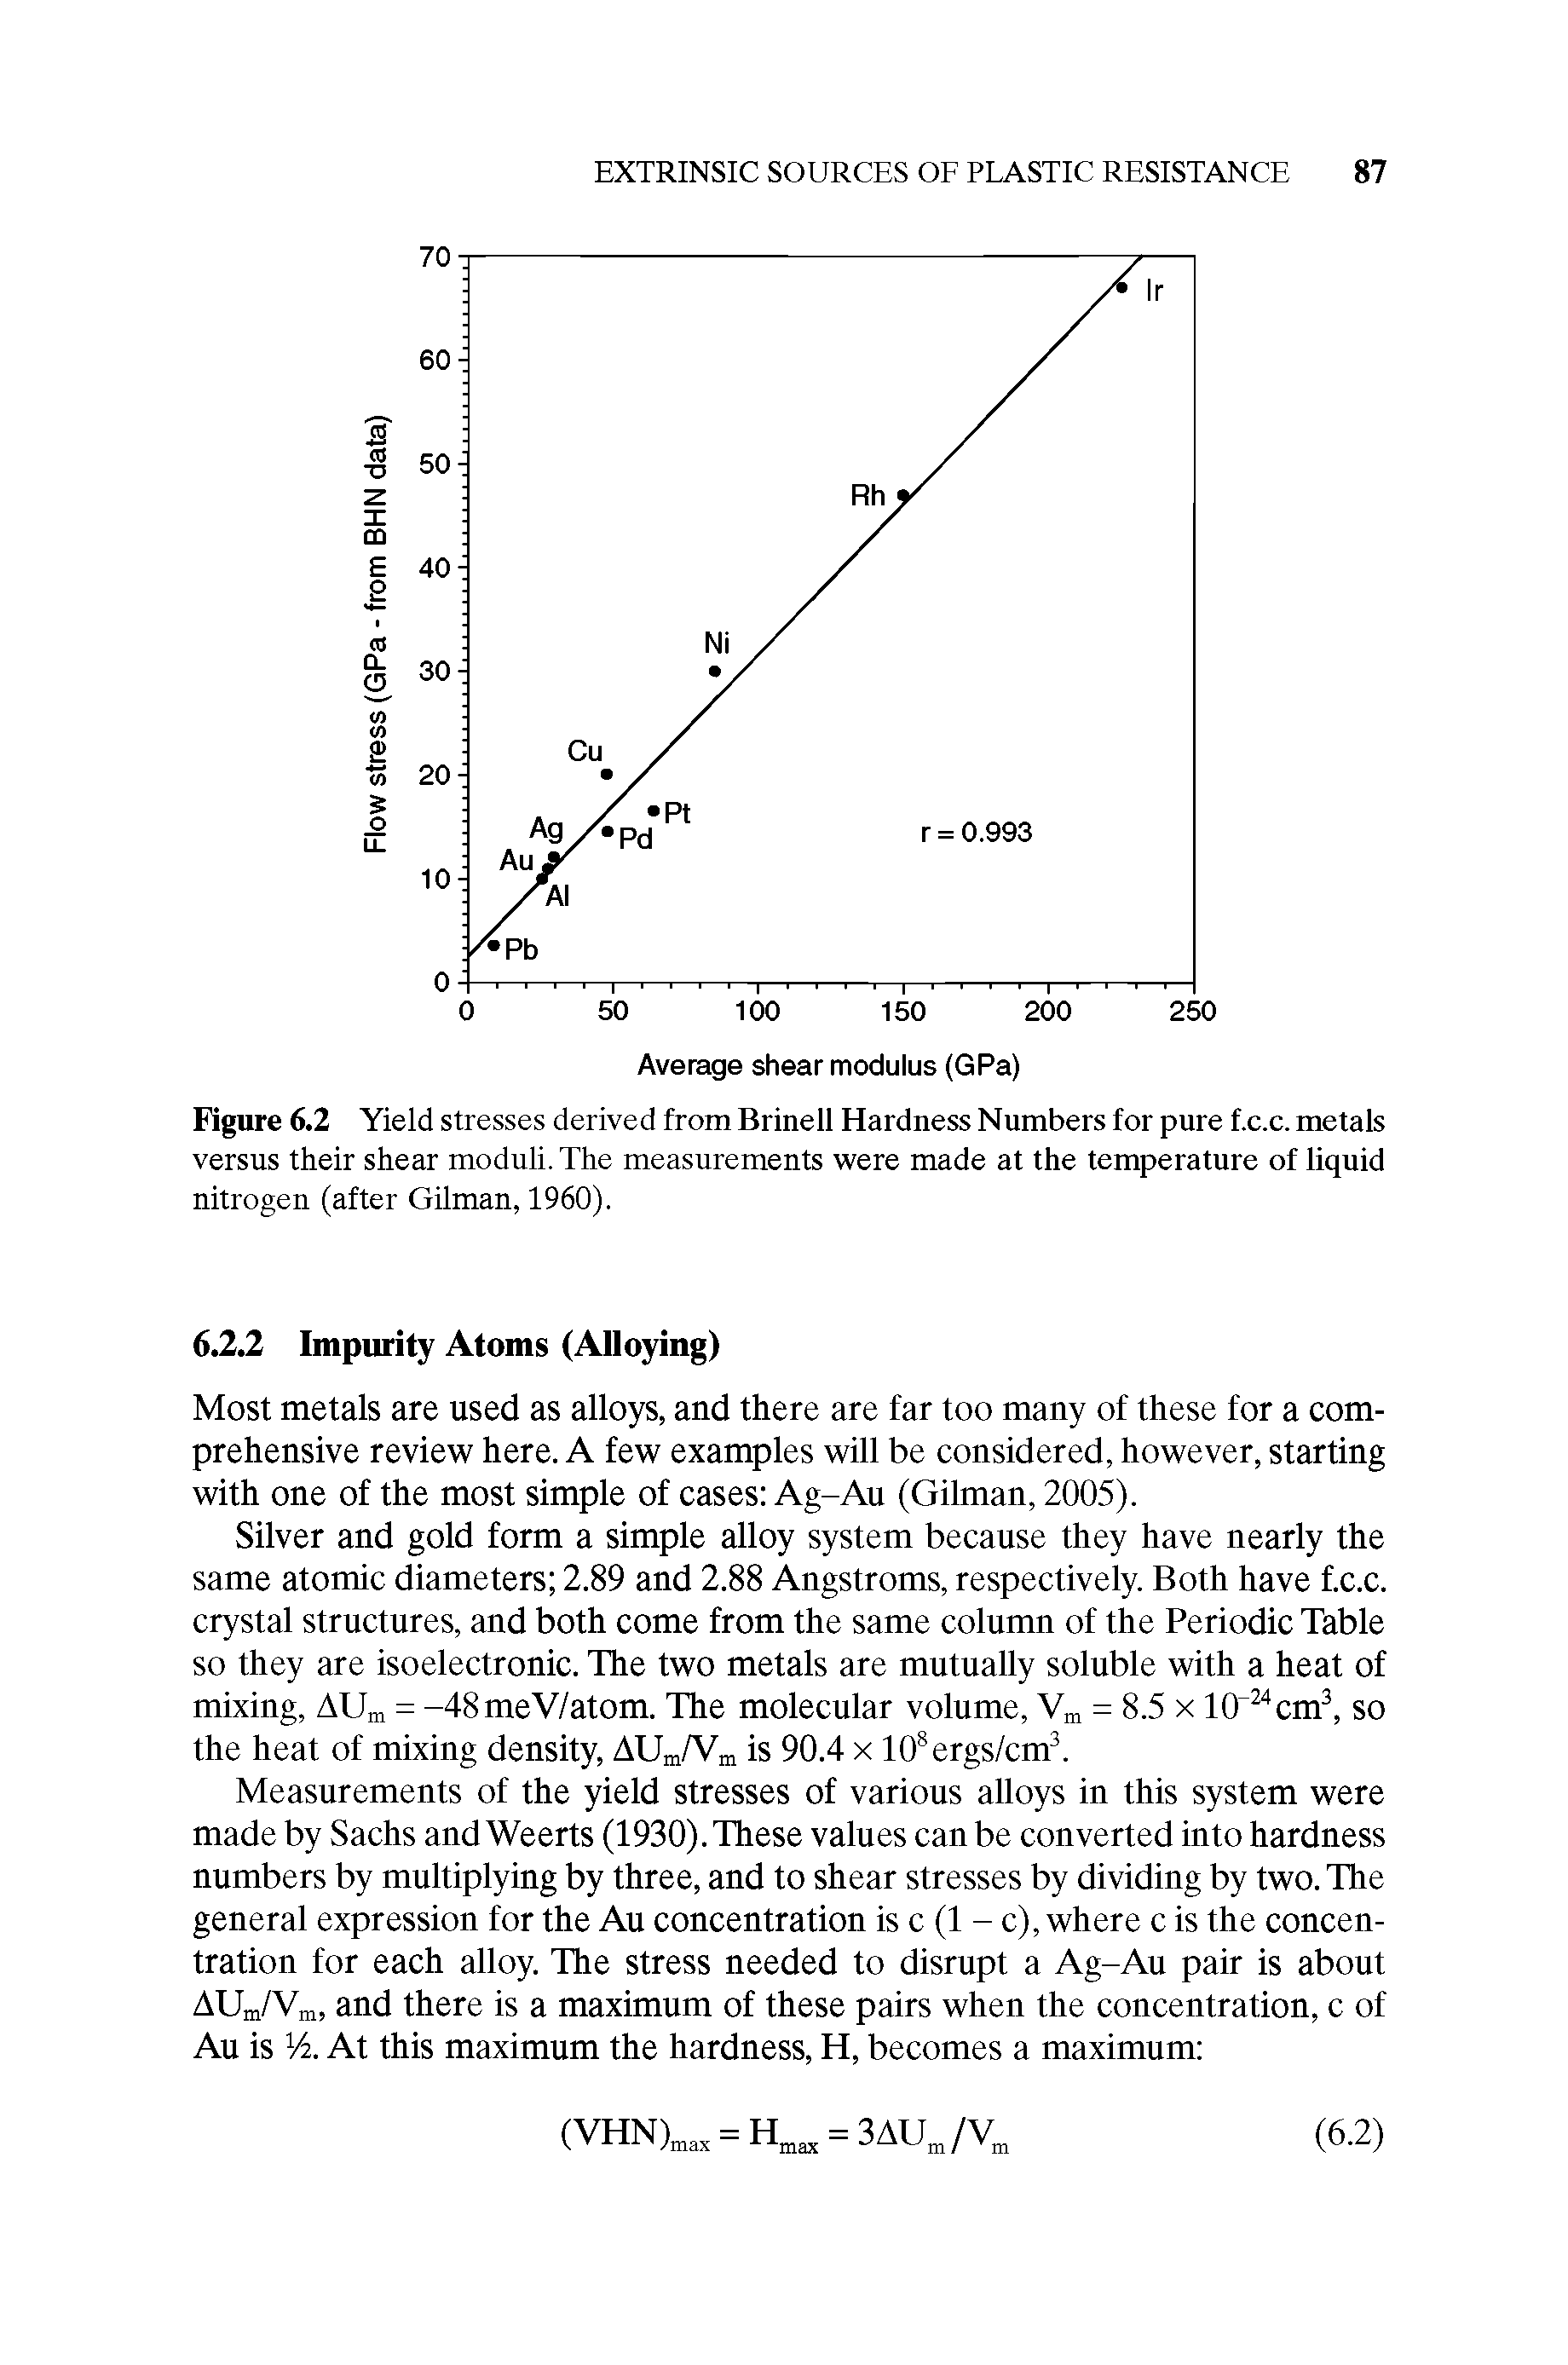 Figure 6.2 Yield stresses derived from Brinell Hardness Numbers for pure f.c.c. metals versus their shear moduli. The measurements were made at the temperature of liquid nitrogen (after Gilman, 1960).